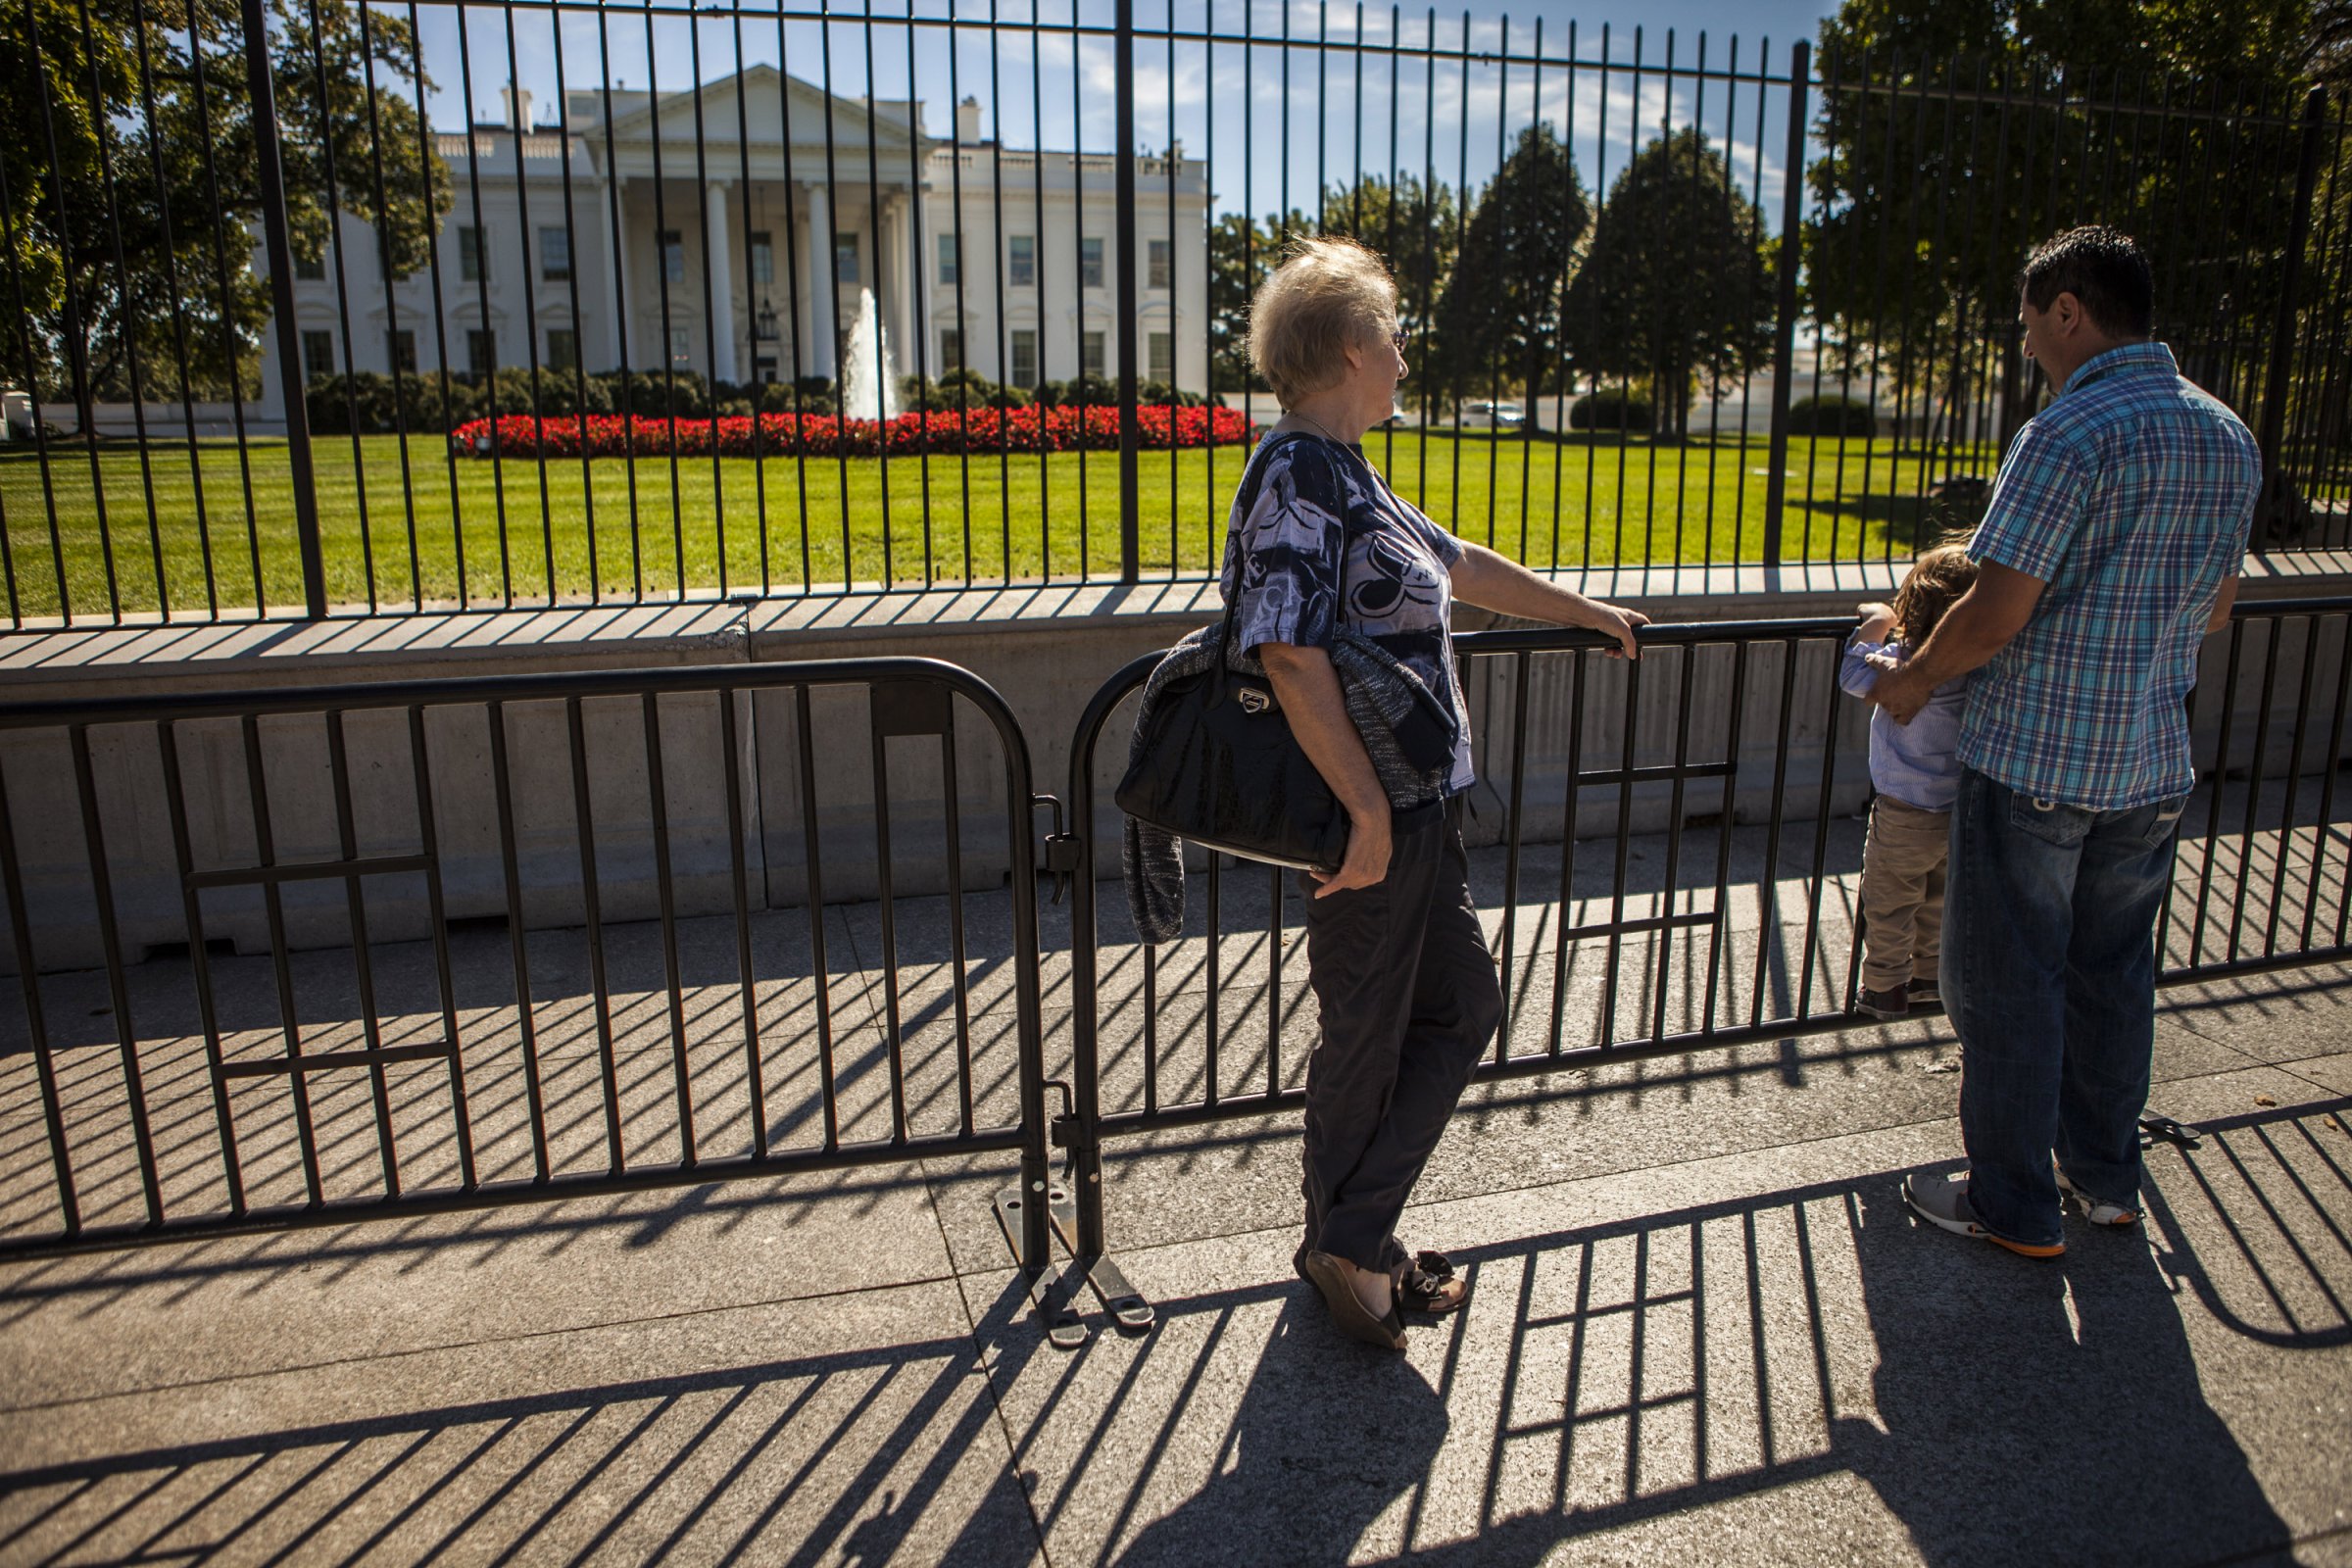 Security measures outside of White House